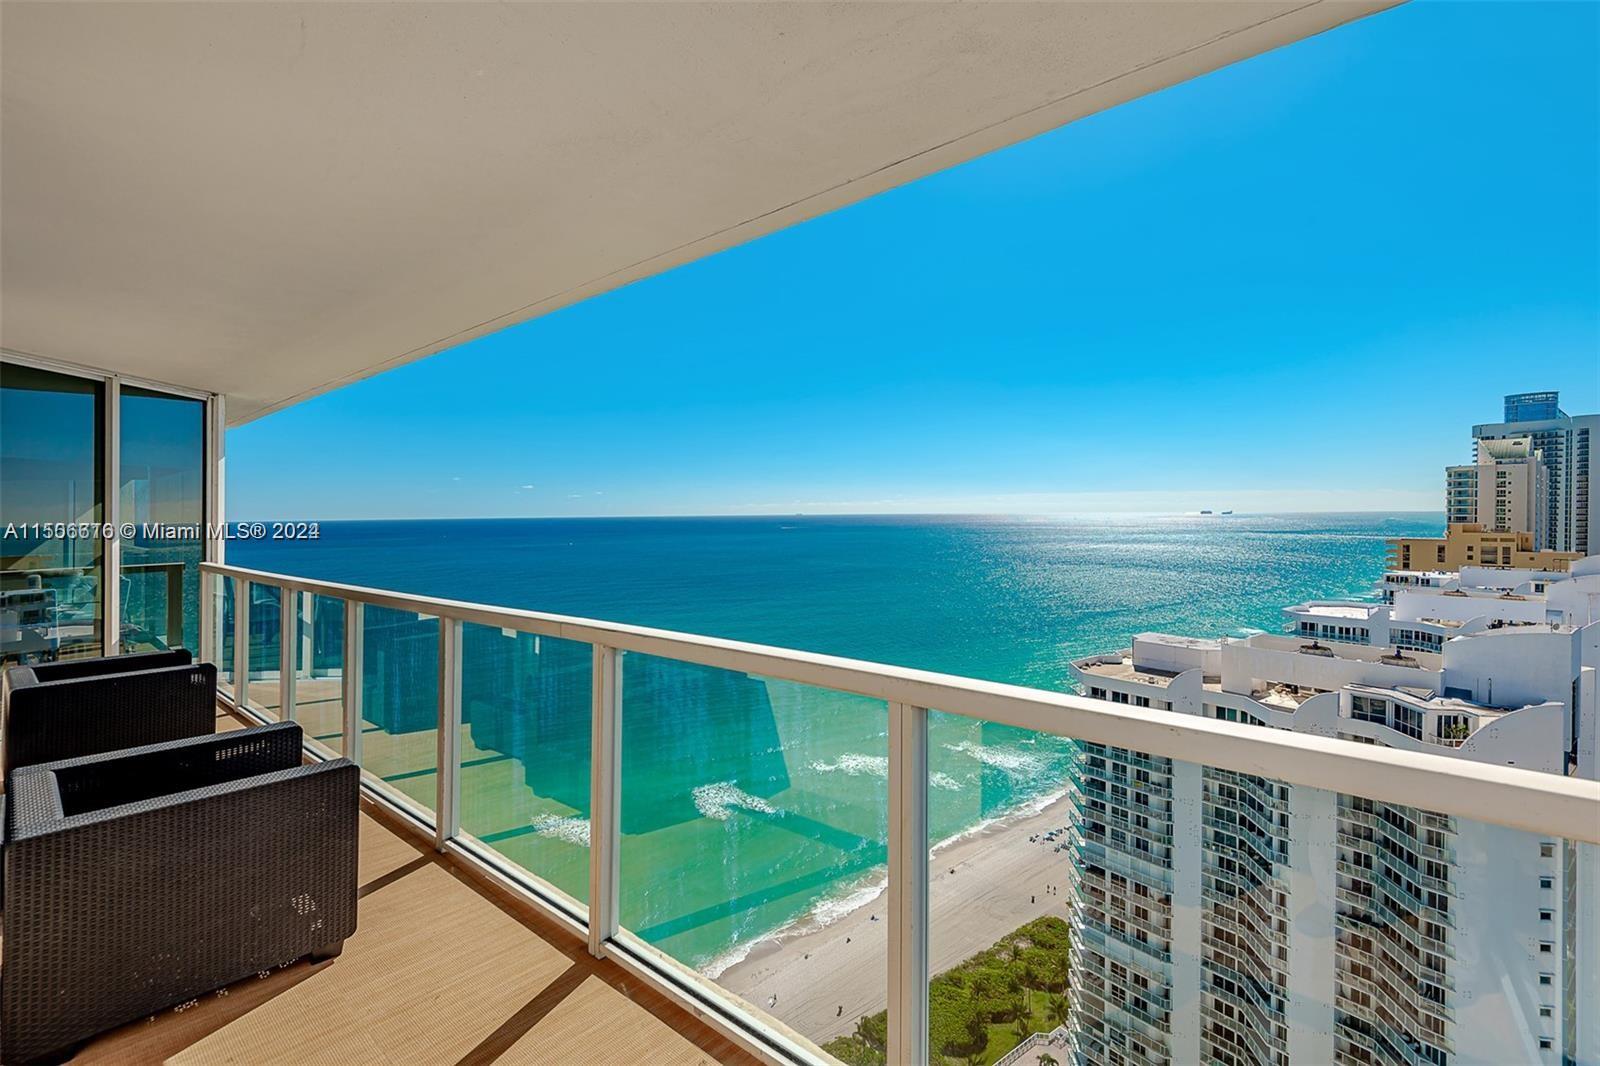 AVAILABLE MID MARCH for Short term or Long term Rental. This spacious 2 bedroom 2 baths offers oversized wraparound balcony with breathtaking Ocean & Intracoastal Views. Beach Service and Valet parking are included, together with internet, 24 hour Concierge, gym and kids play room. Steps away from restaurants, shops, Pier, Aventura Mall and Bal Harbour Shops. STR#02732